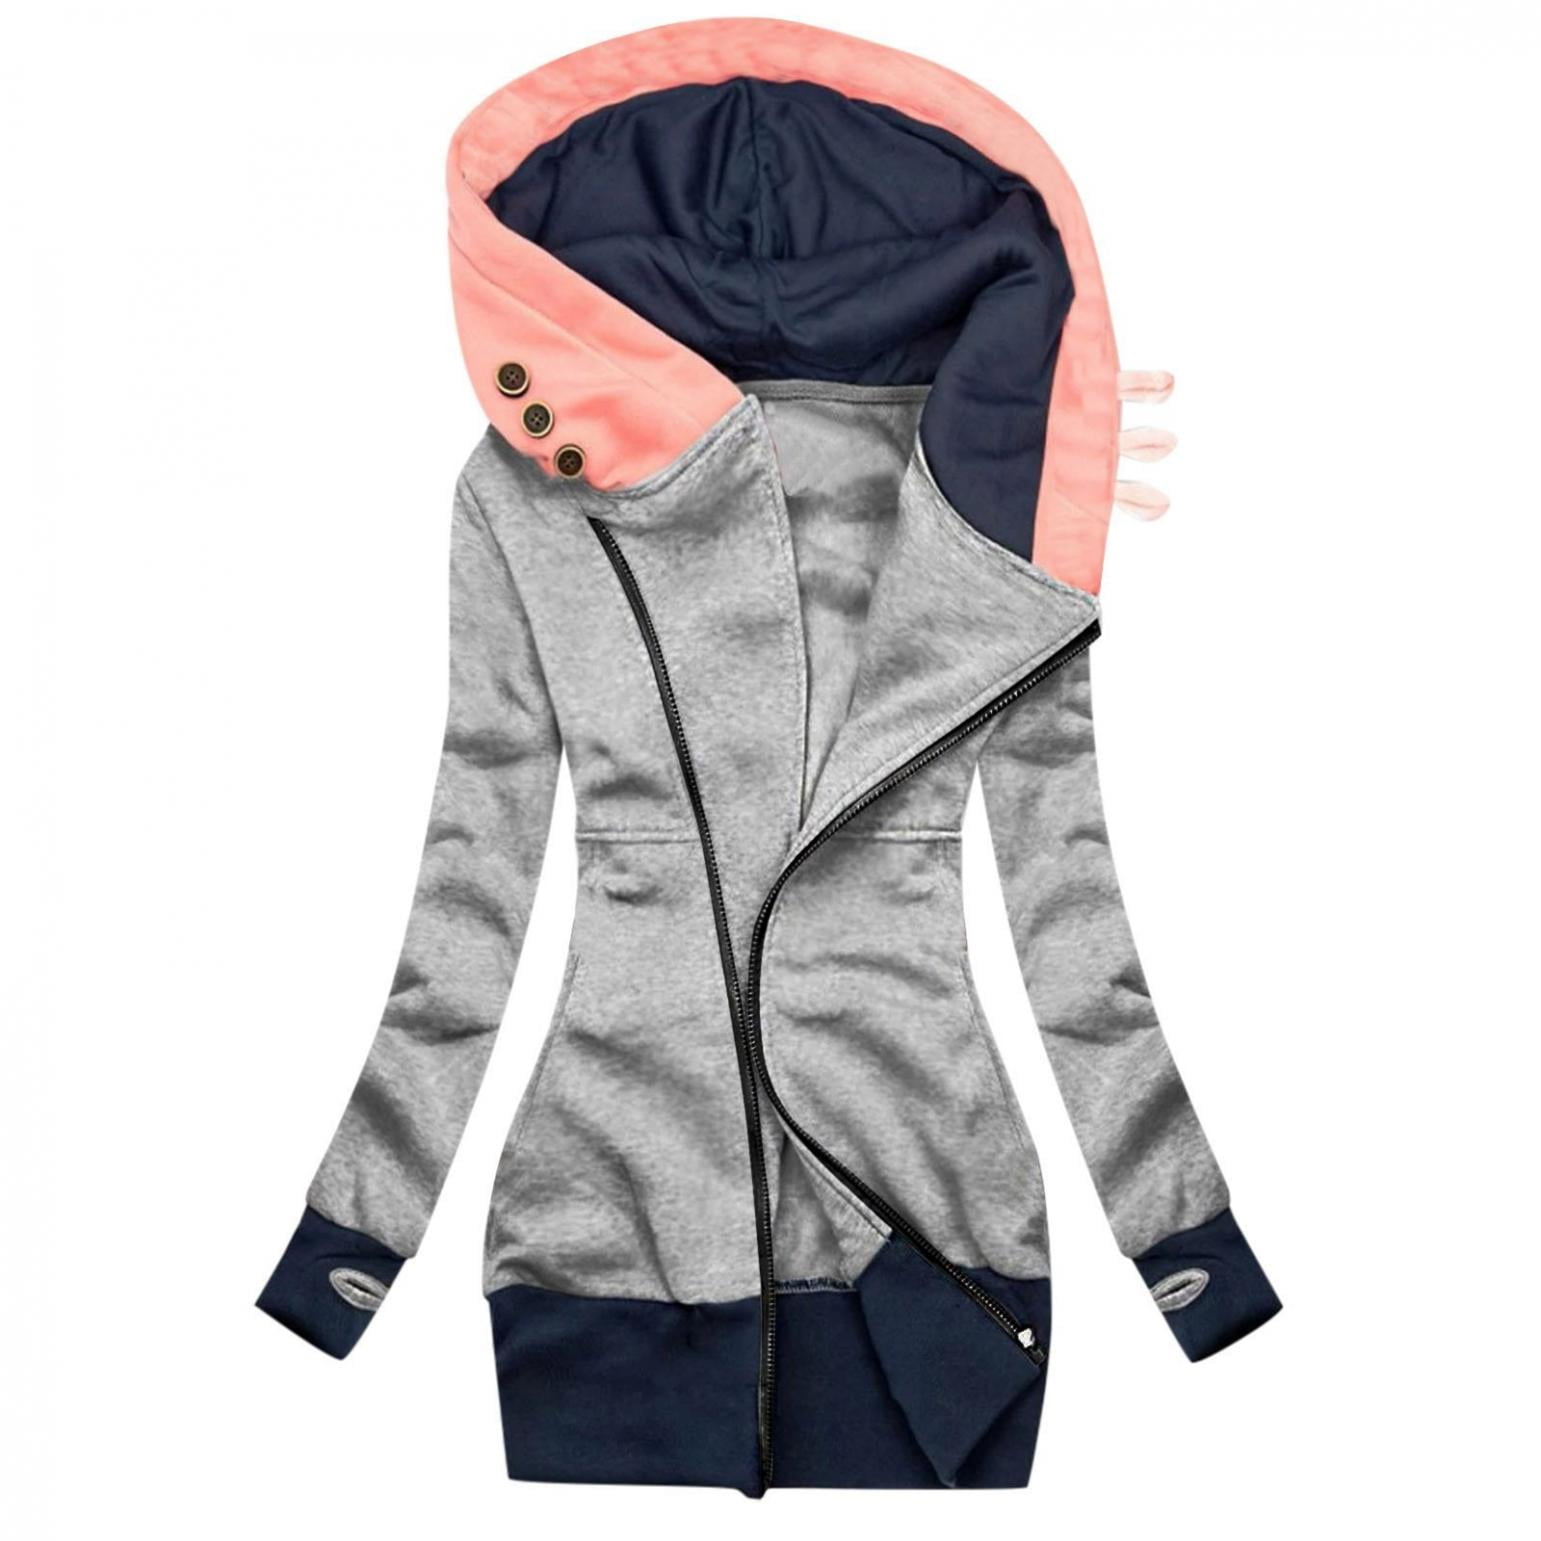  Warm Winter Coats for Women Fuzzy Furry Jackets Casual Long  Sleeve Hoodie Sweatshirts with Pocket Side Button Hoodies : Sports &  Outdoors